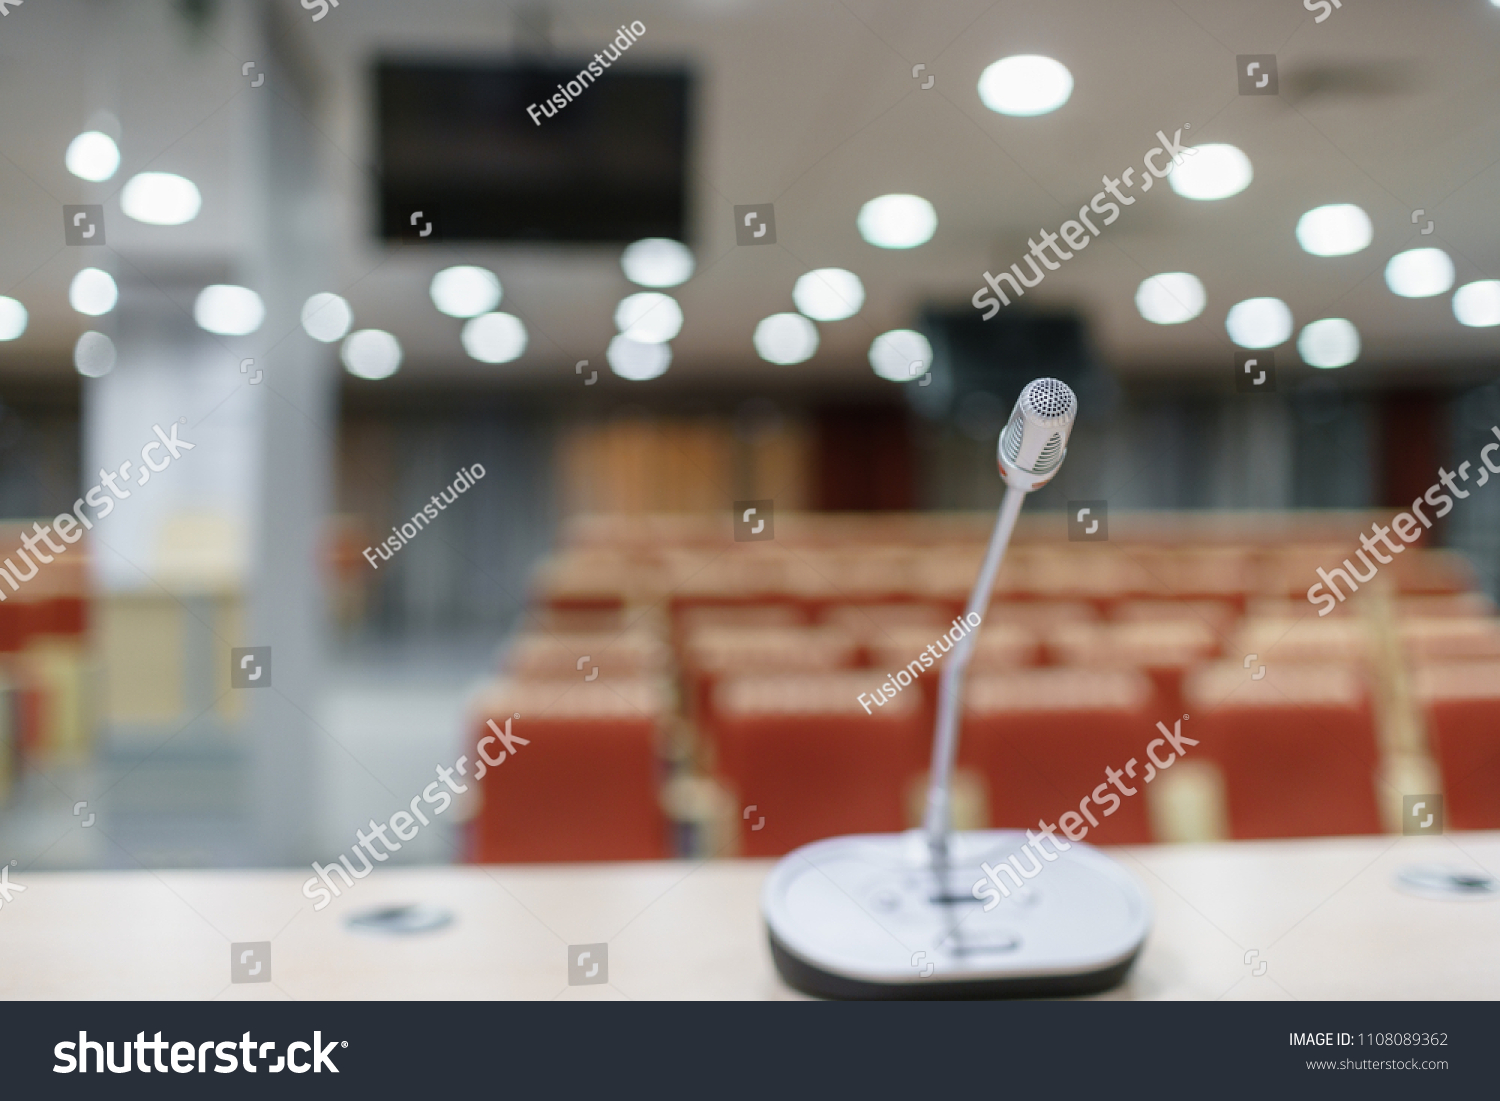 microphone in the foreground. Seminar presentation. Conference room full of empty seats. Red color. Hall for workshops and seminars #1108089362